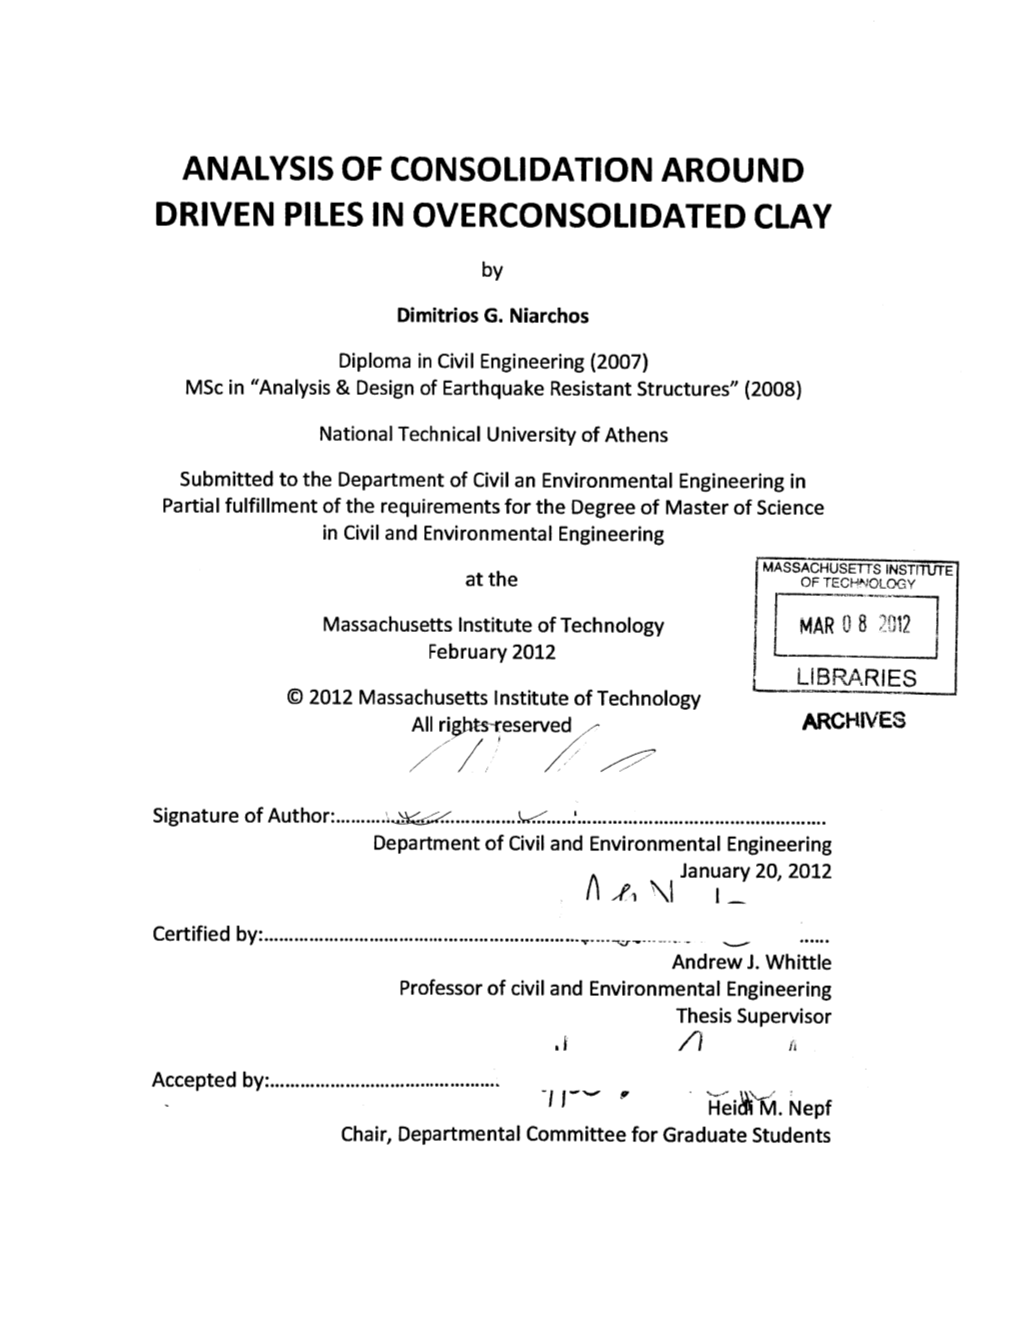 ANALYSIS of CONSOLIDATION AROUND DRIVEN PILES in OVERCONSOLI DATED CLAY by Dimitrios G